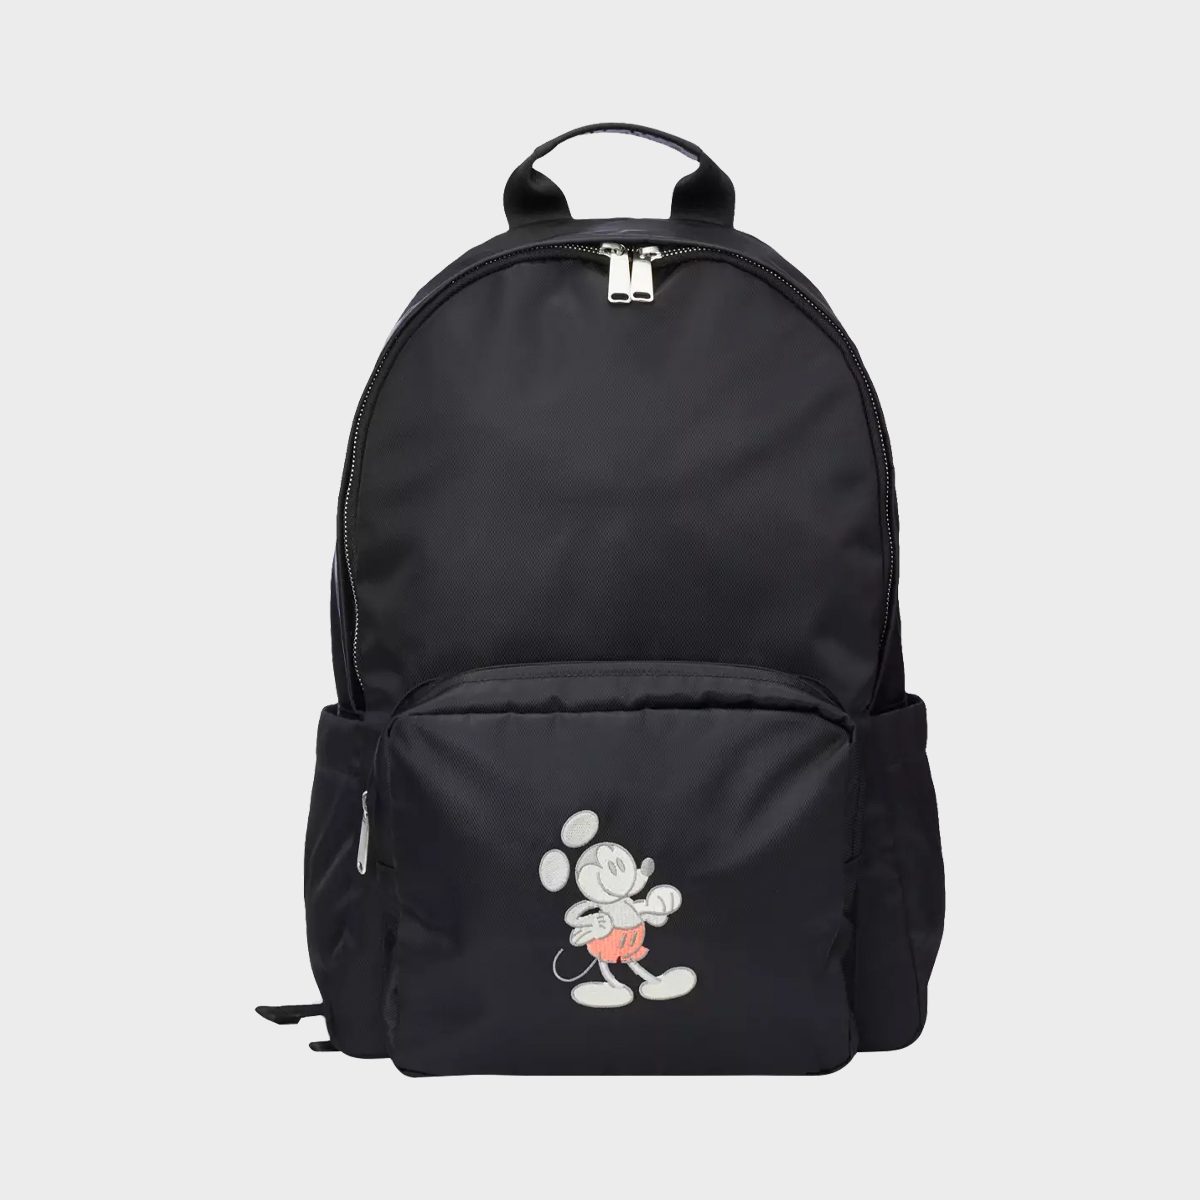 https://www.rd.com/wp-content/uploads/2023/02/Mickey-Mouse-Genuine-Mousewear-Embroidered-Backpack-ecomm-shopdisney.com_.jpg?fit=700%2C700